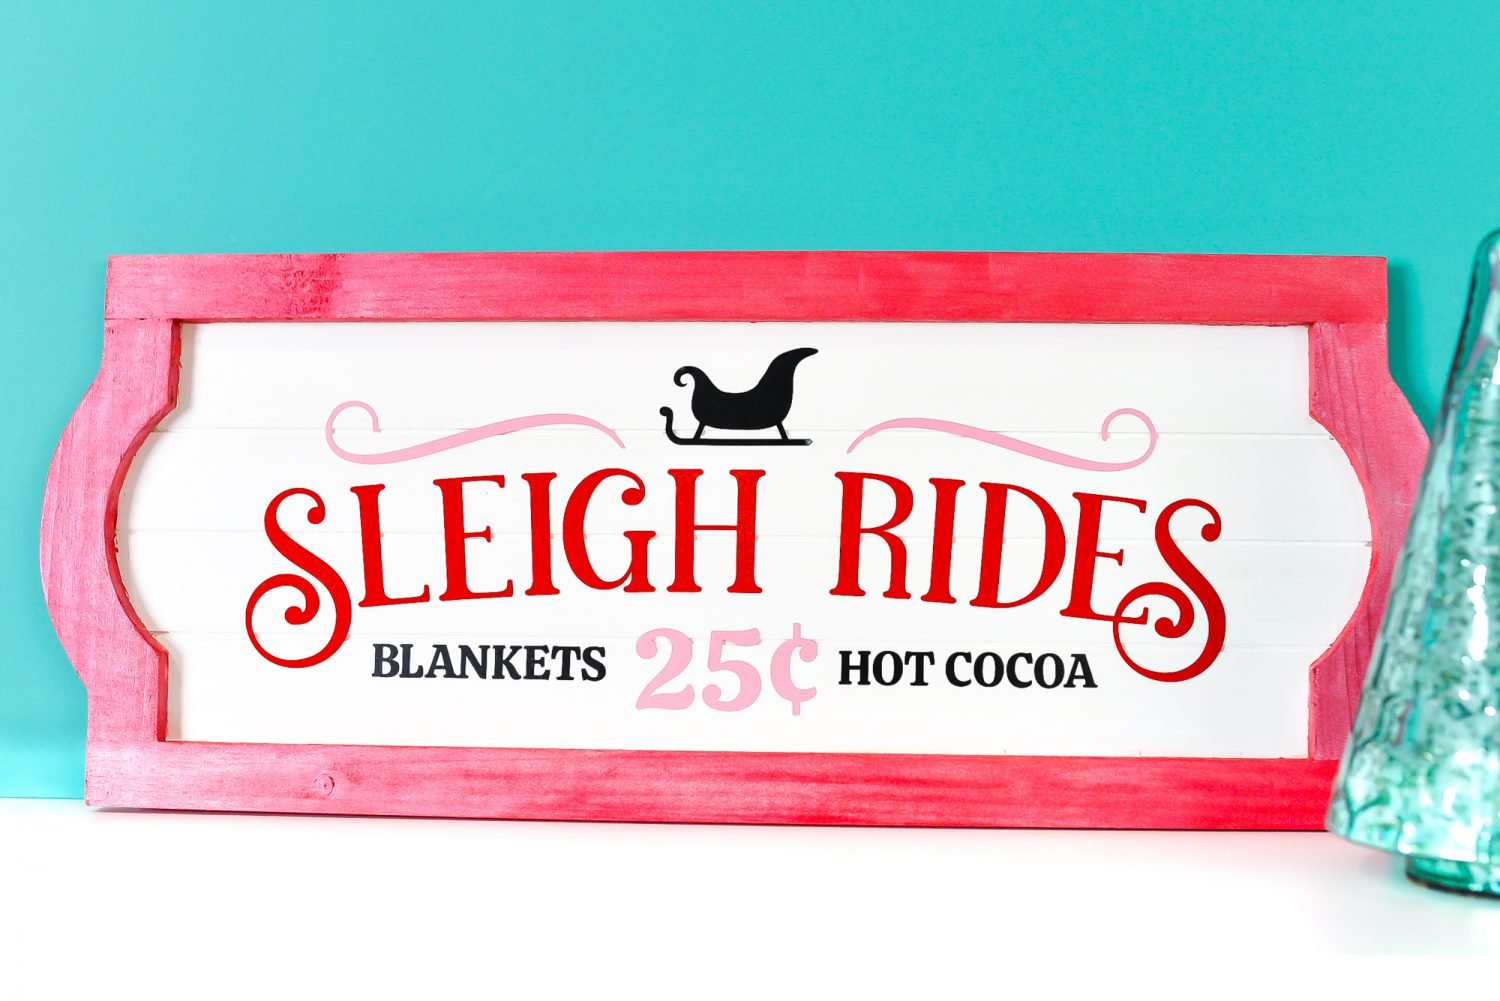 Sleigh Rides sign on white shelf with blue background and Christmas tree decor